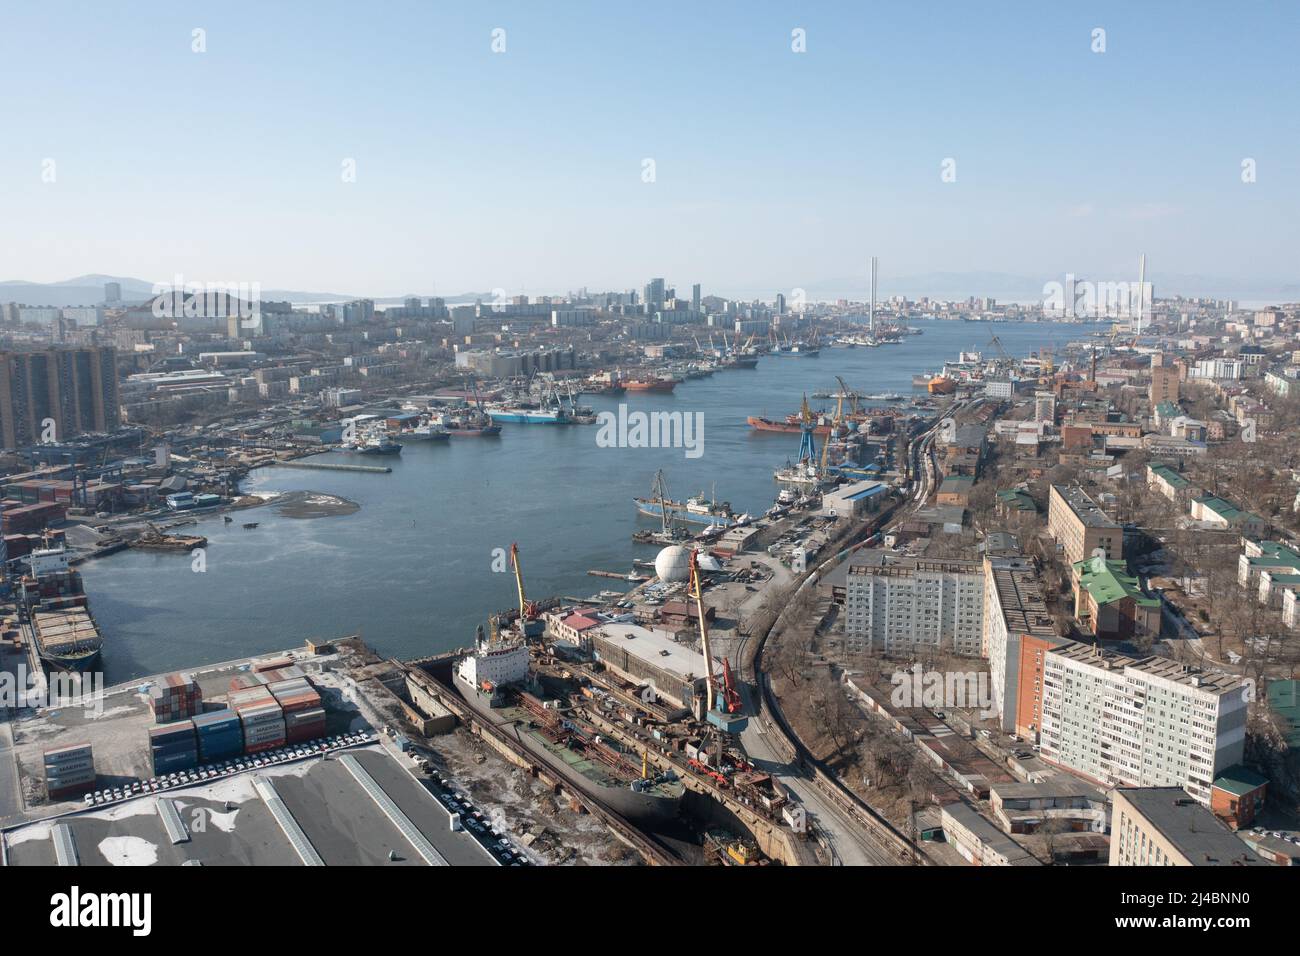 The view from the top of the bay, houses and streets of the city. Stock Photo